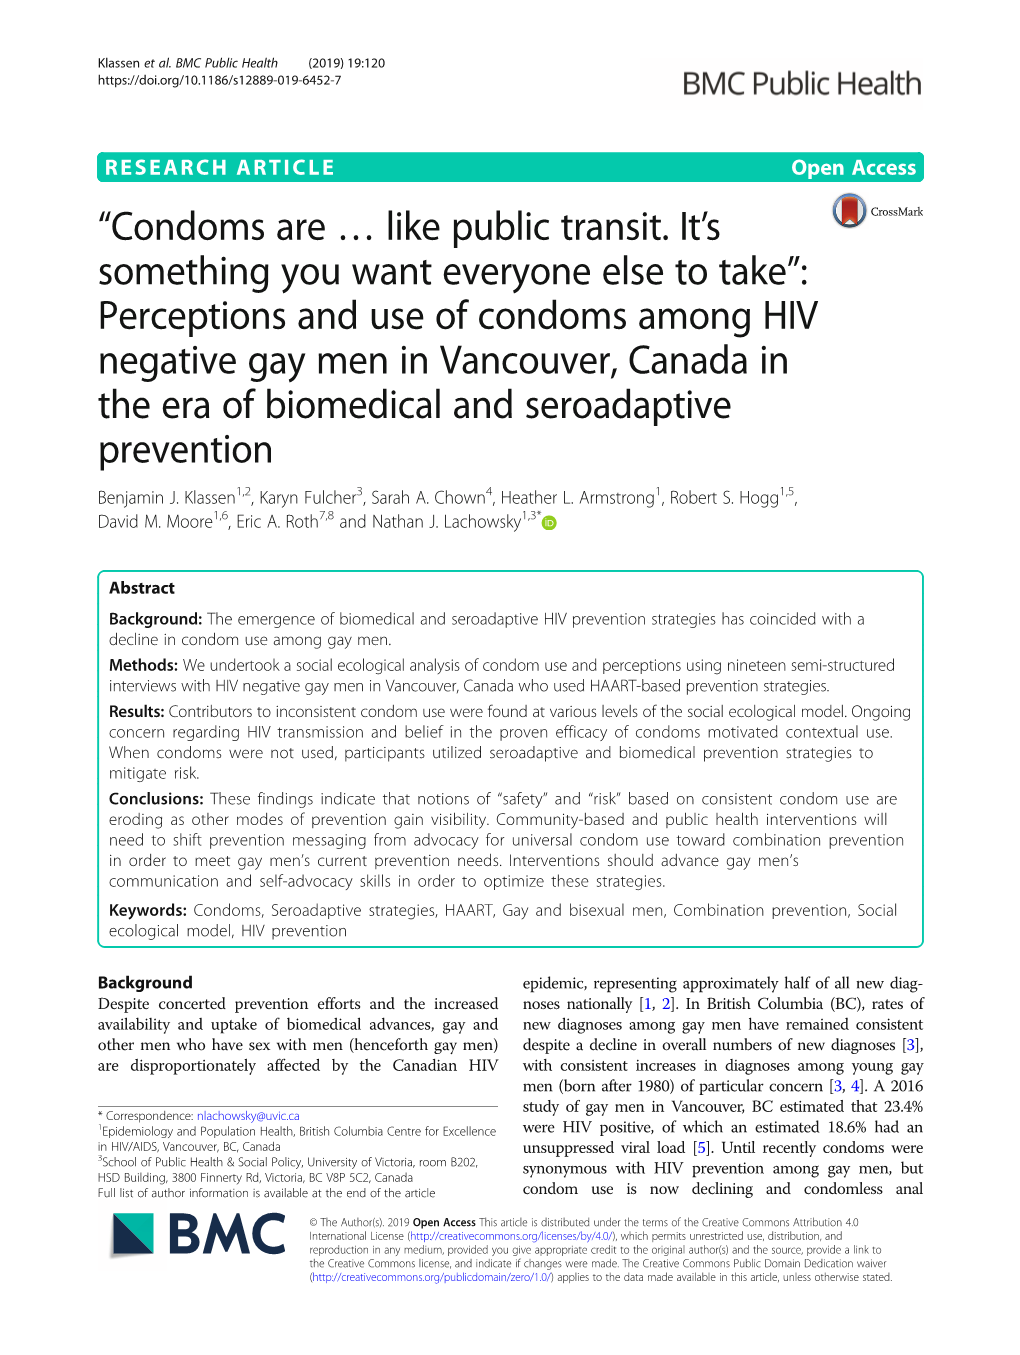 Perceptions and Use of Condoms Among HIV Negative Gay Men in Vancouver, Canada in the Era of Biomedical and Seroadaptive Prevention Benjamin J